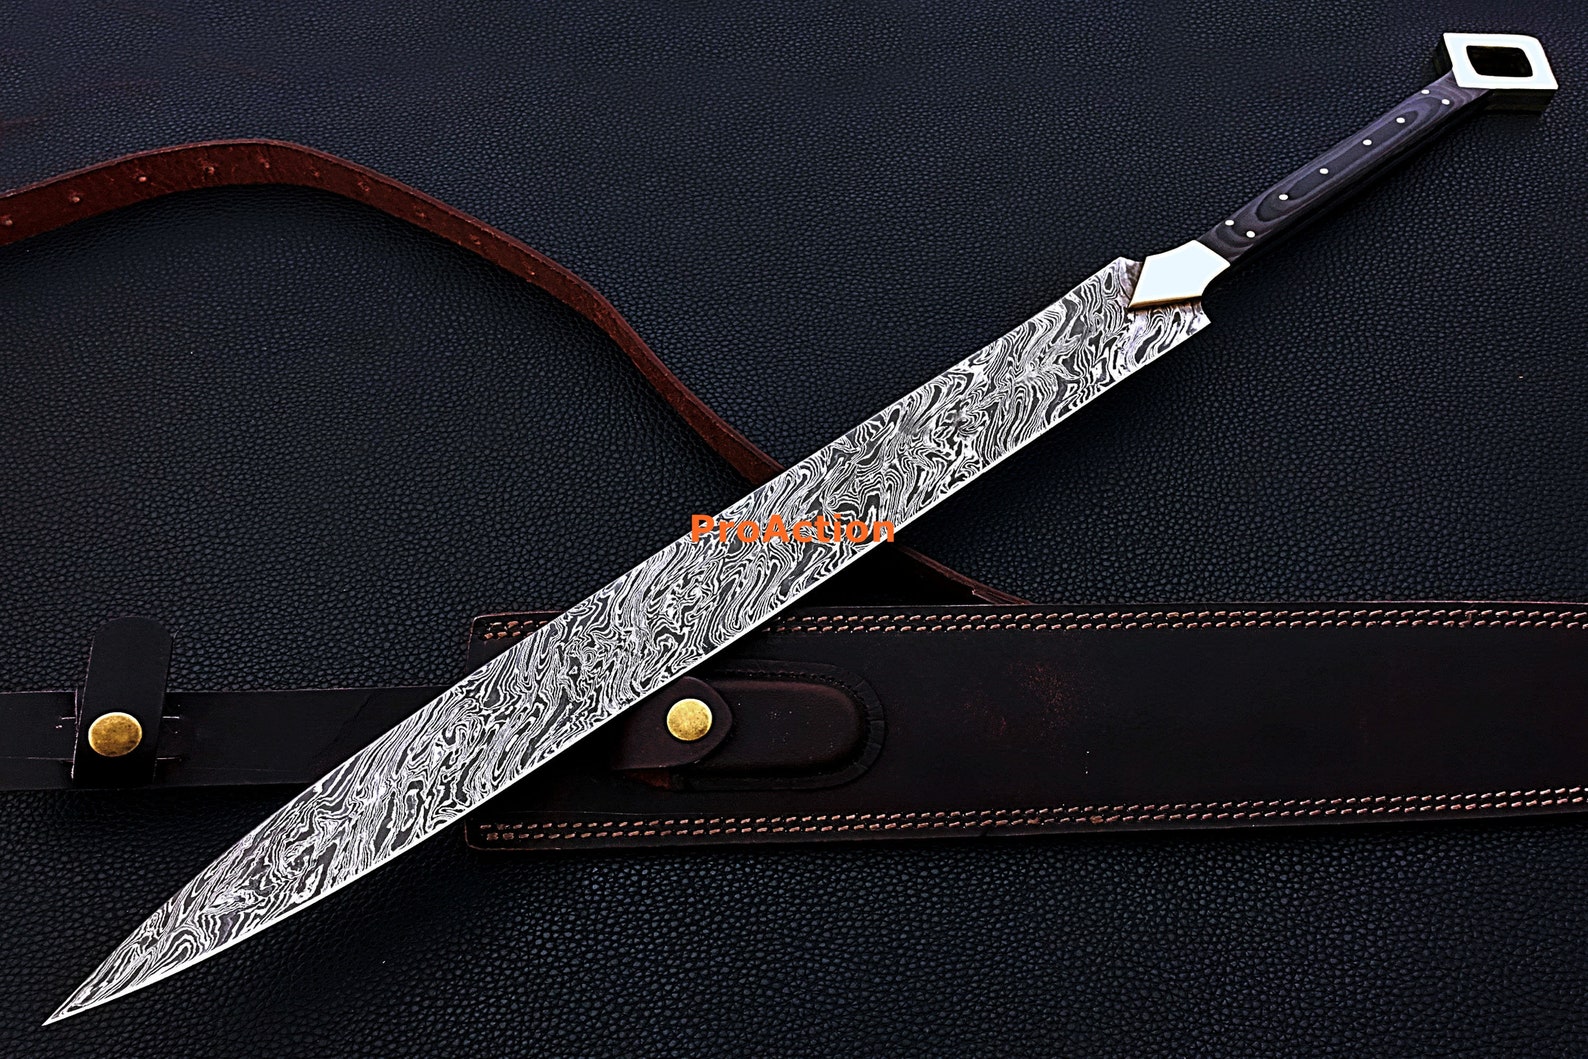 Remarkable Hand Forged Sword Longsword 30 Damascus Etsy